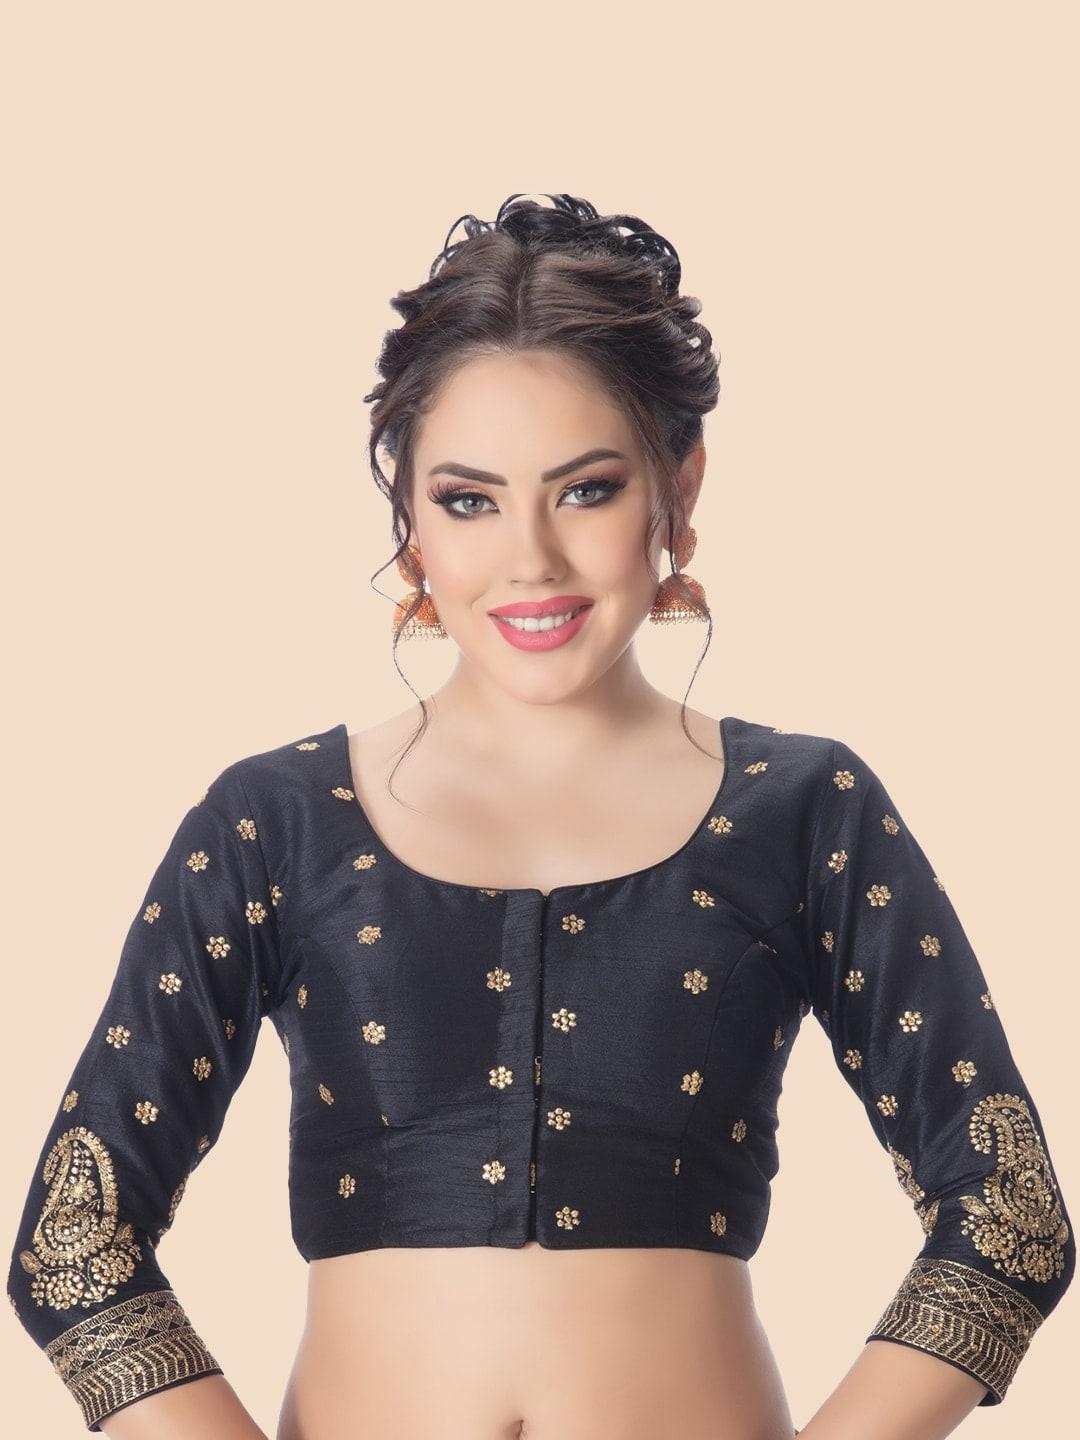 Neckbook Black & Gold-Toned Embroidered Princess Cut Padded Readymade Saree Blouse